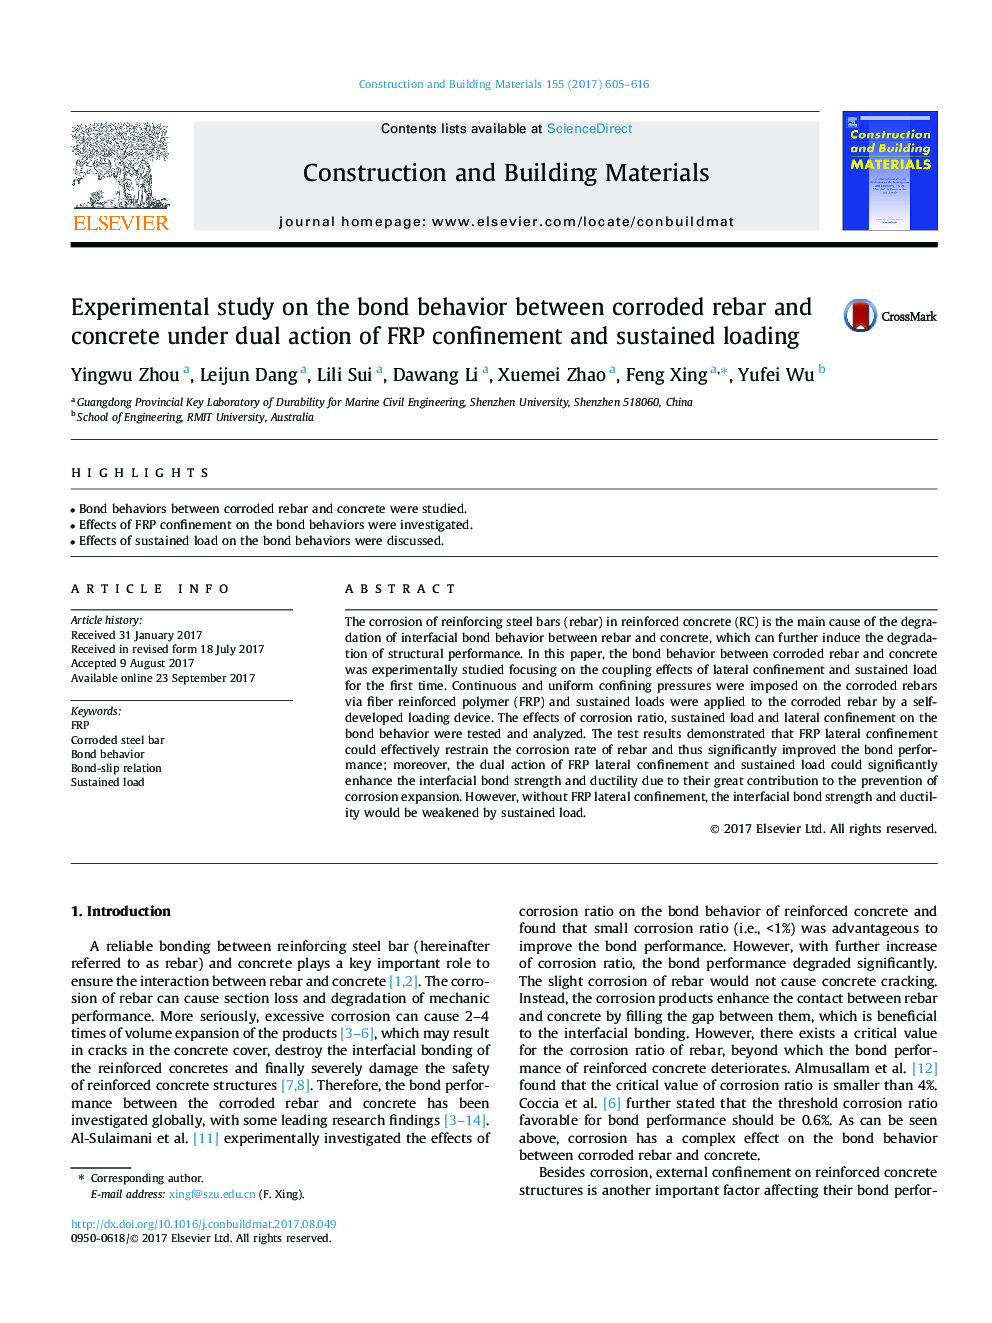 Experimental study on the bond behavior between corroded rebar and concrete under dual action of FRP confinement and sustained loading